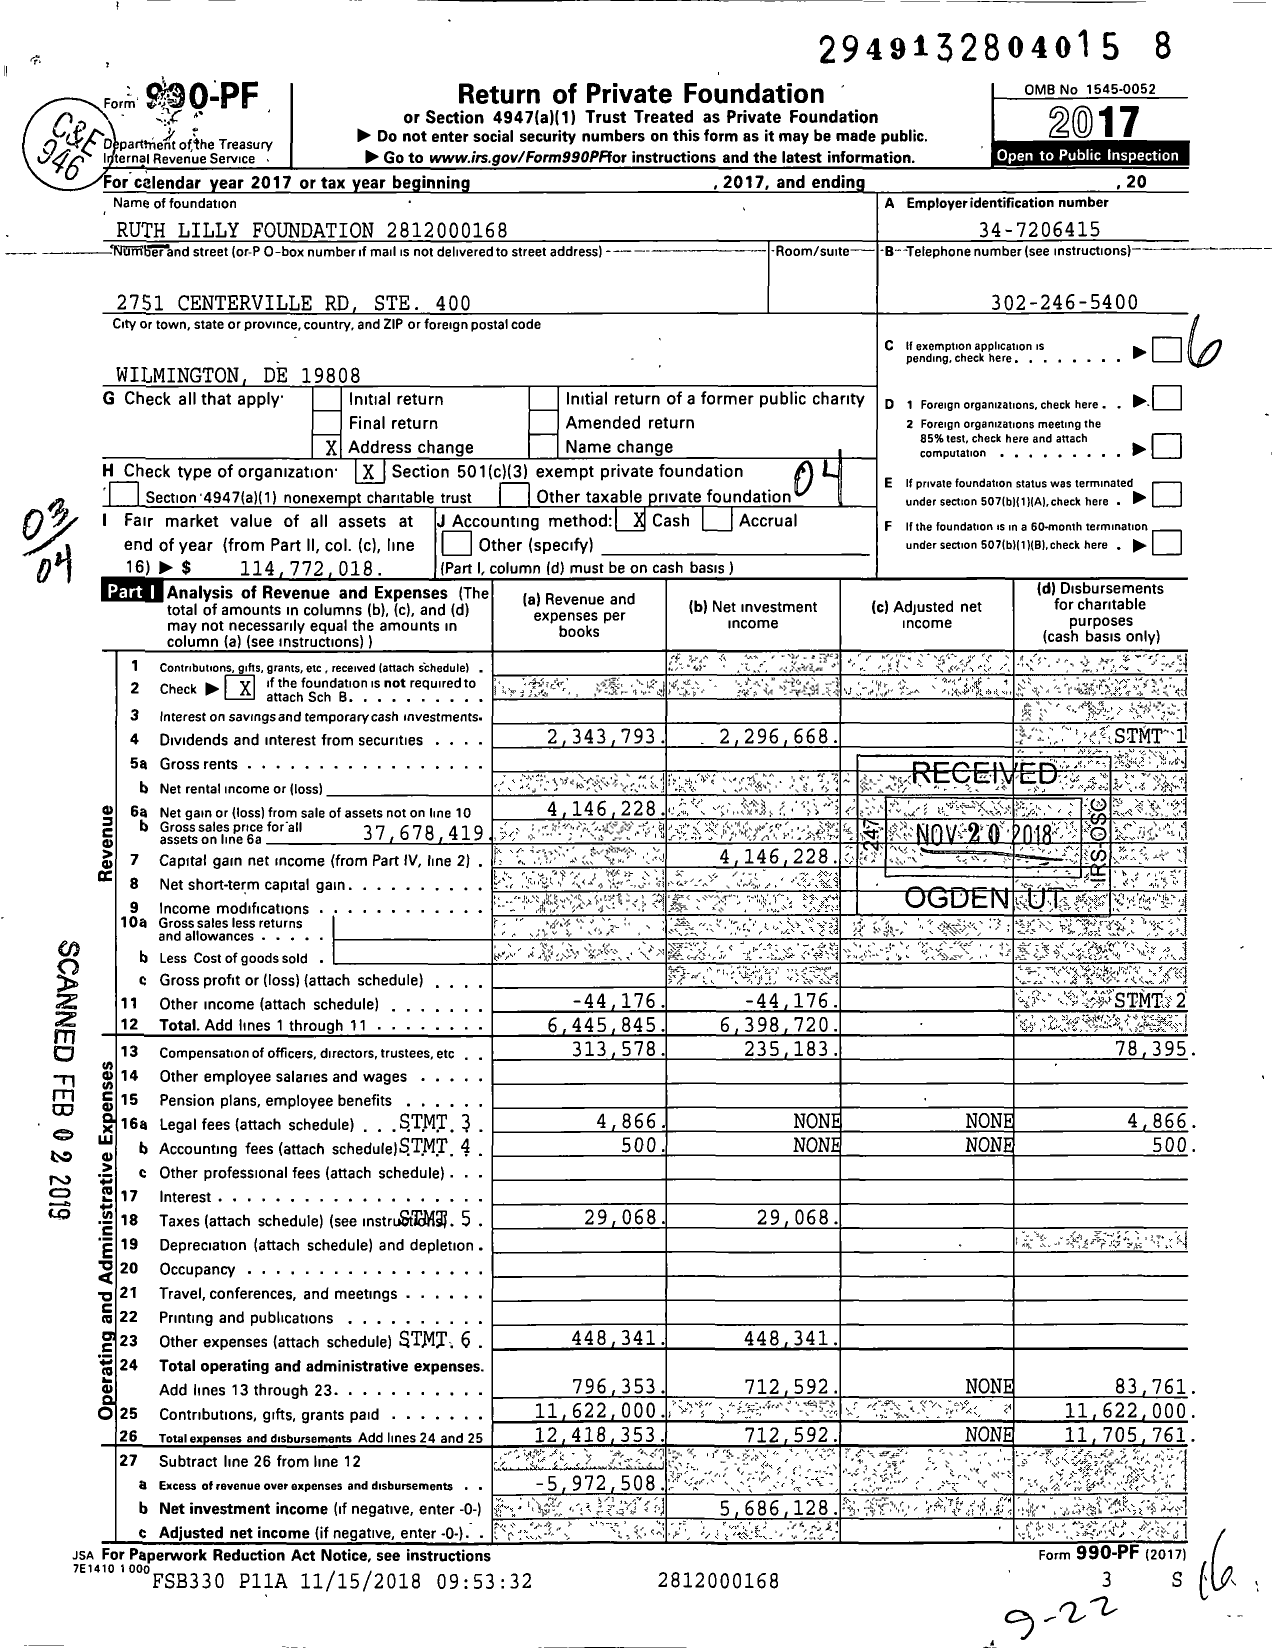 Image of first page of 2017 Form 990PF for Ruth Lilly Foundation